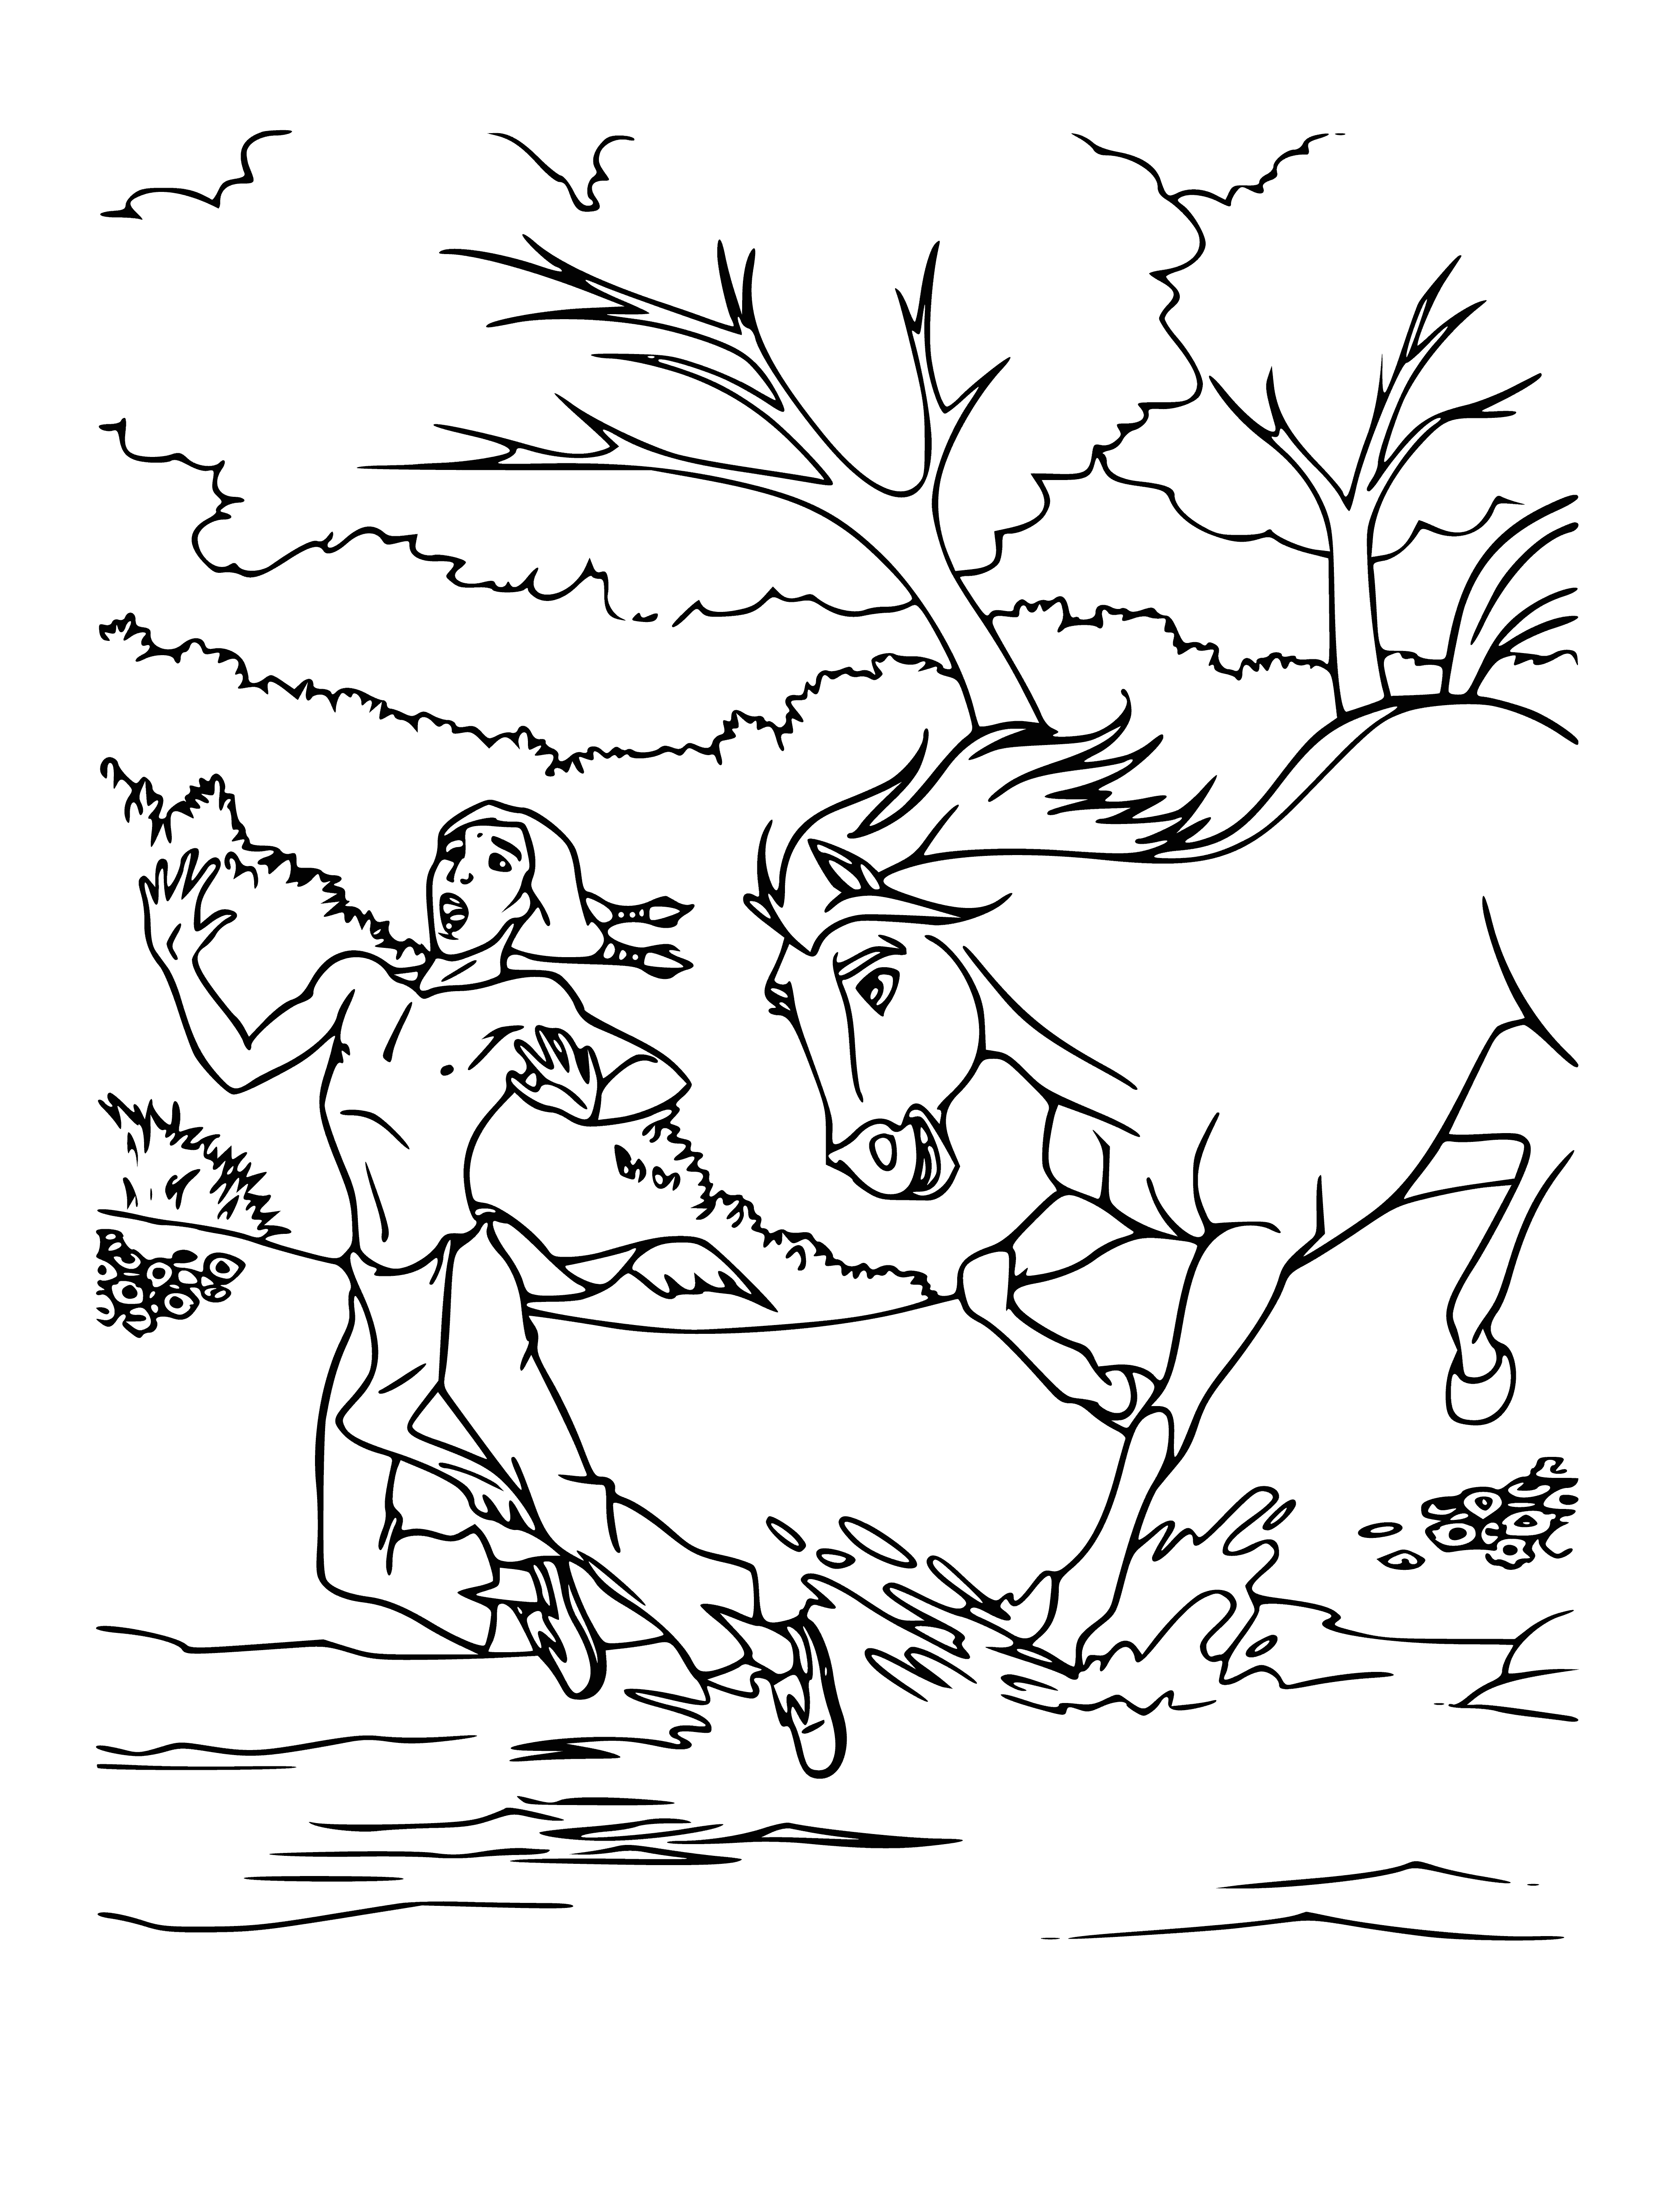 coloring page: A Native American is confronting a buckskin colored stallion with a black mane and tail, rearing up on its hind legs. The Native American is wearing a headdress and is holding a spear.